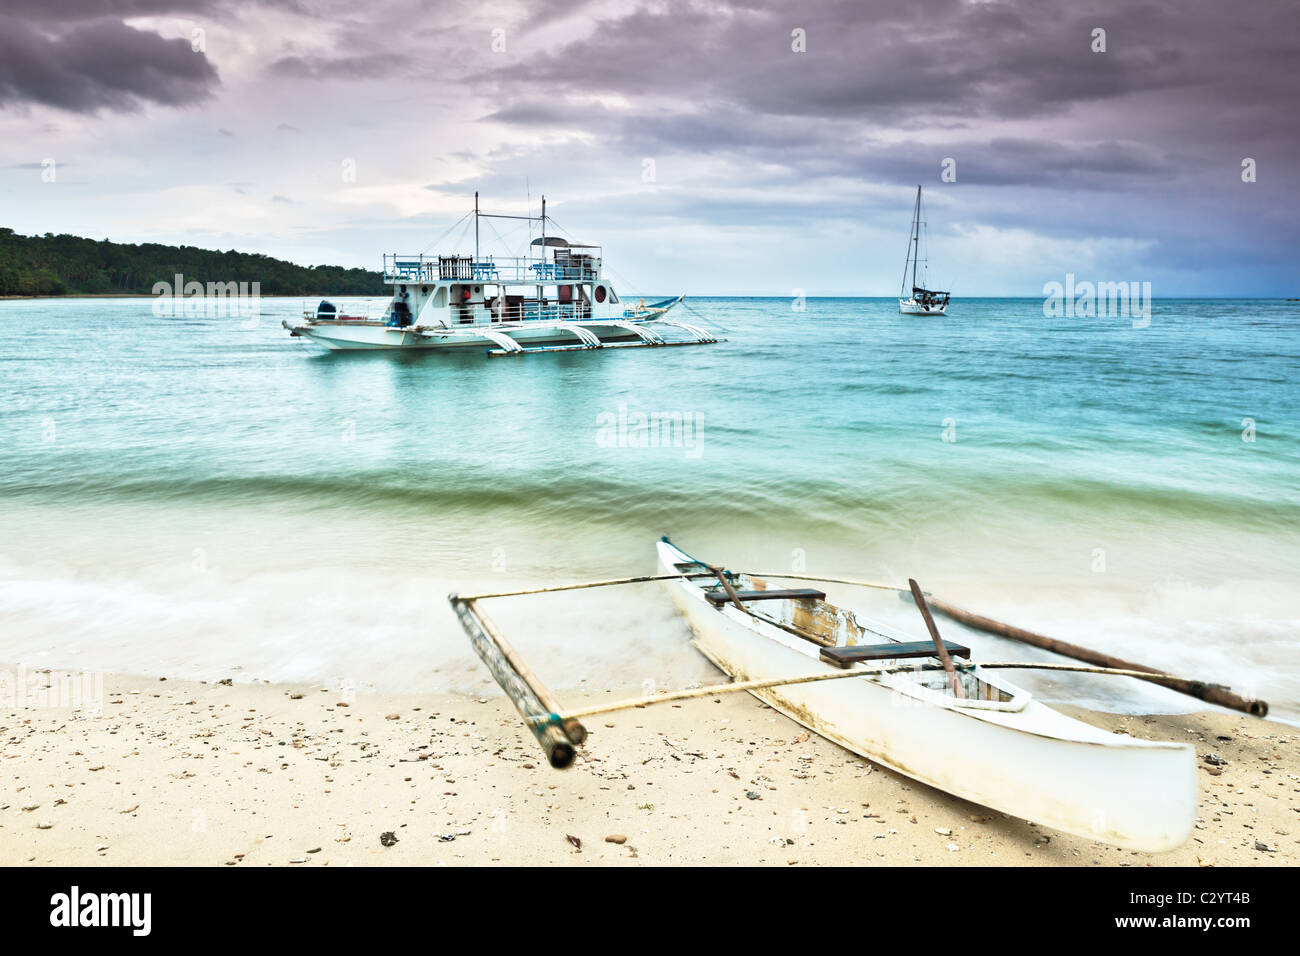 Traditional Philippine boat in the tropical lagoon Stock Photo